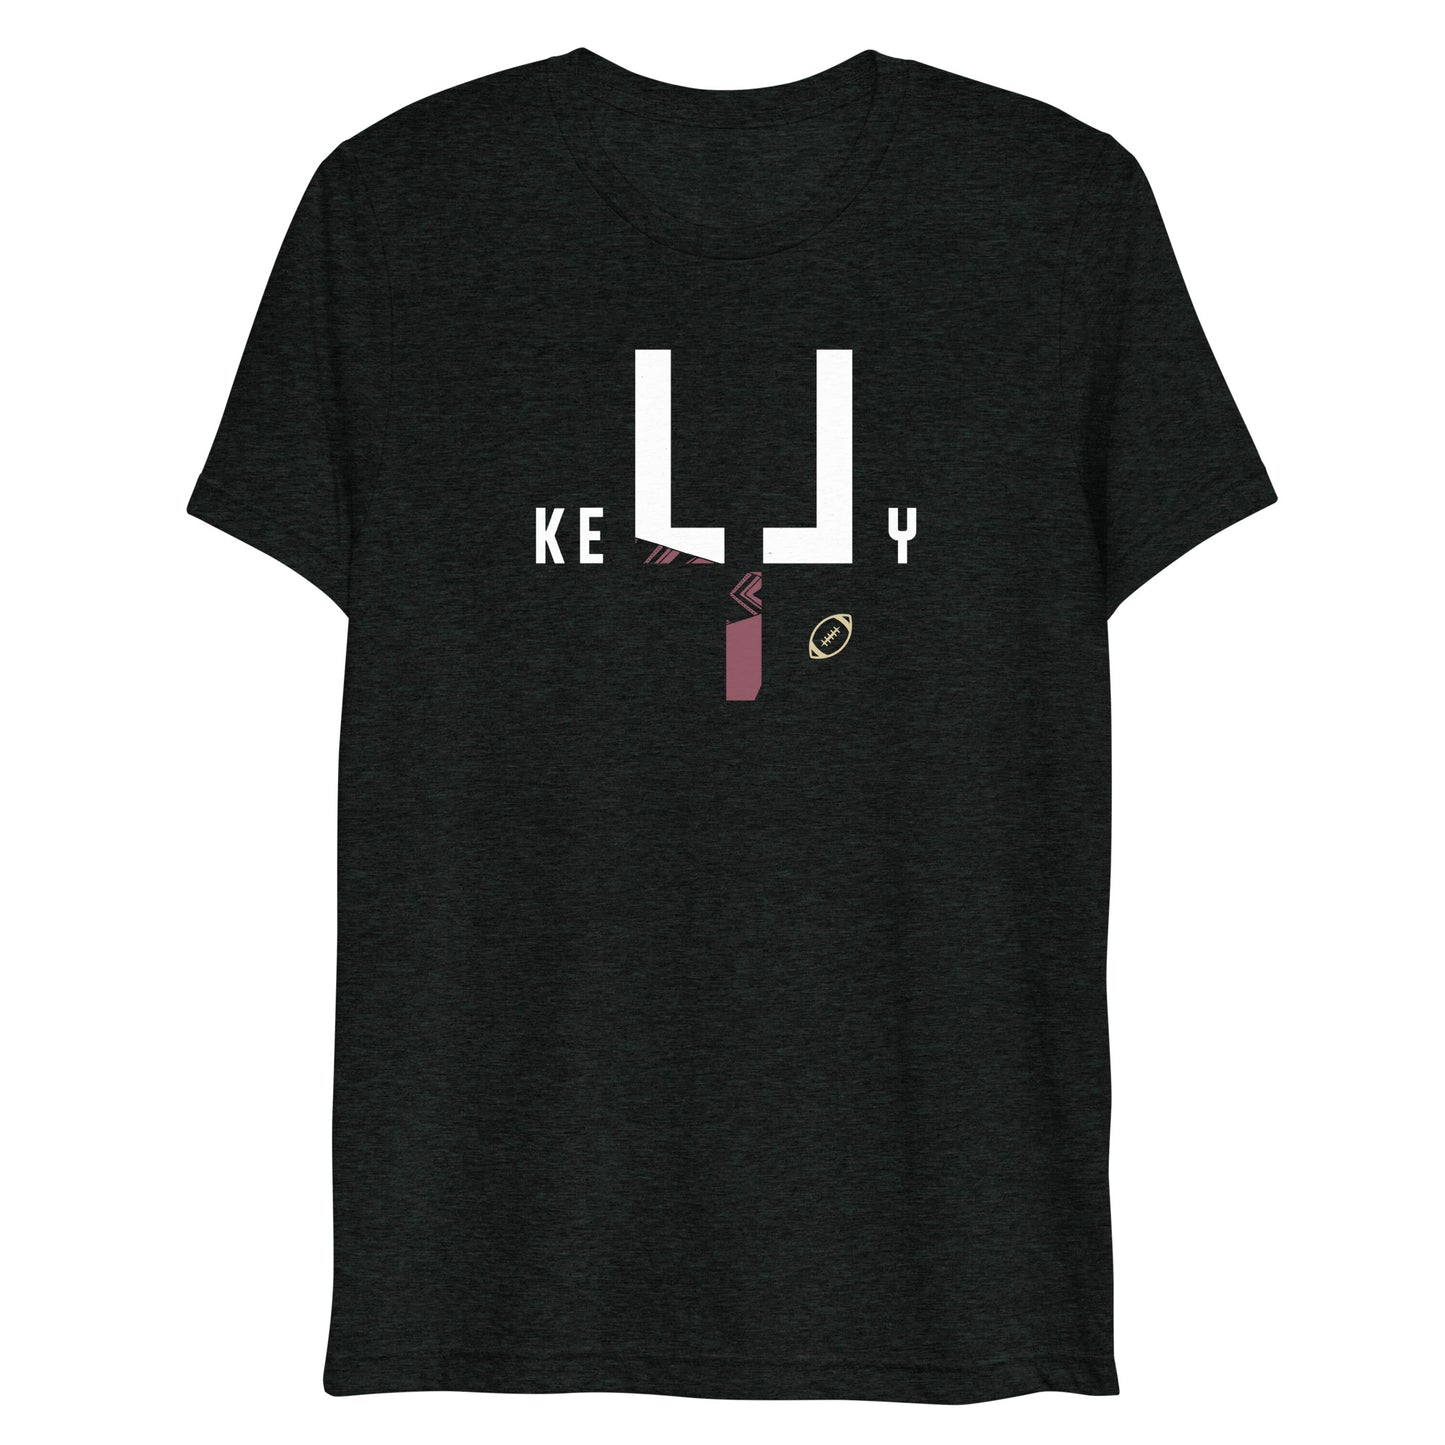 Kelly 0-1 - Short sleeve t-shirt - The College Football Experience